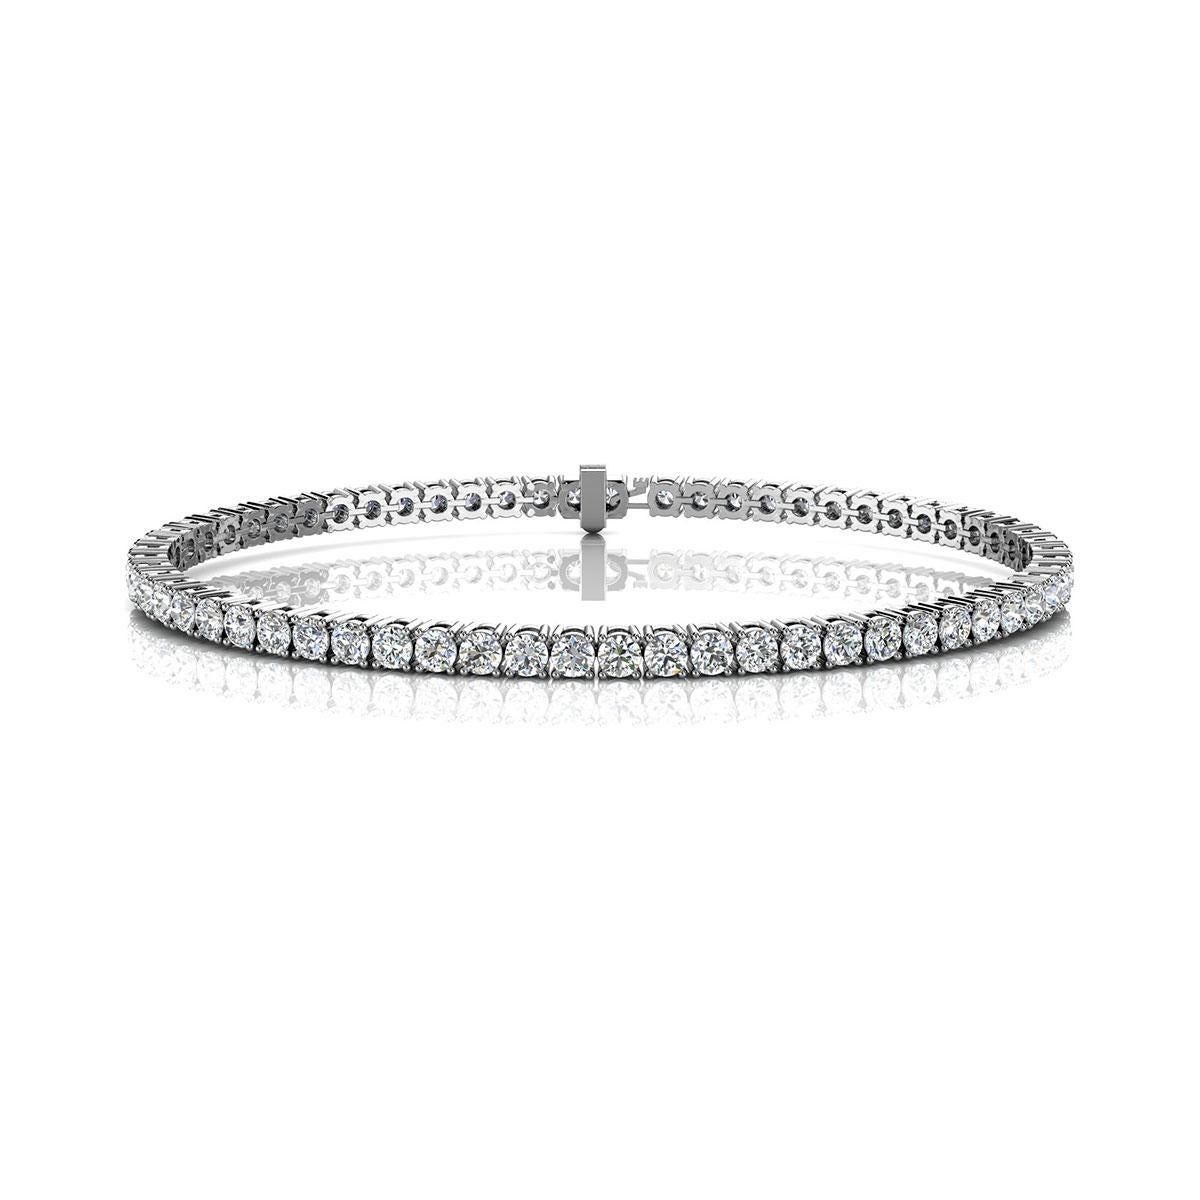 A timeless four prongs diamonds tennis bracelet. Experience the Difference!

Product details: 

Center Gemstone Type: NATURAL DIAMOND
Center Gemstone Color: WHITE
Center Gemstone Shape: ROUND
Center Diamond Carat Weight: 4
Metal: Platinum
Metal